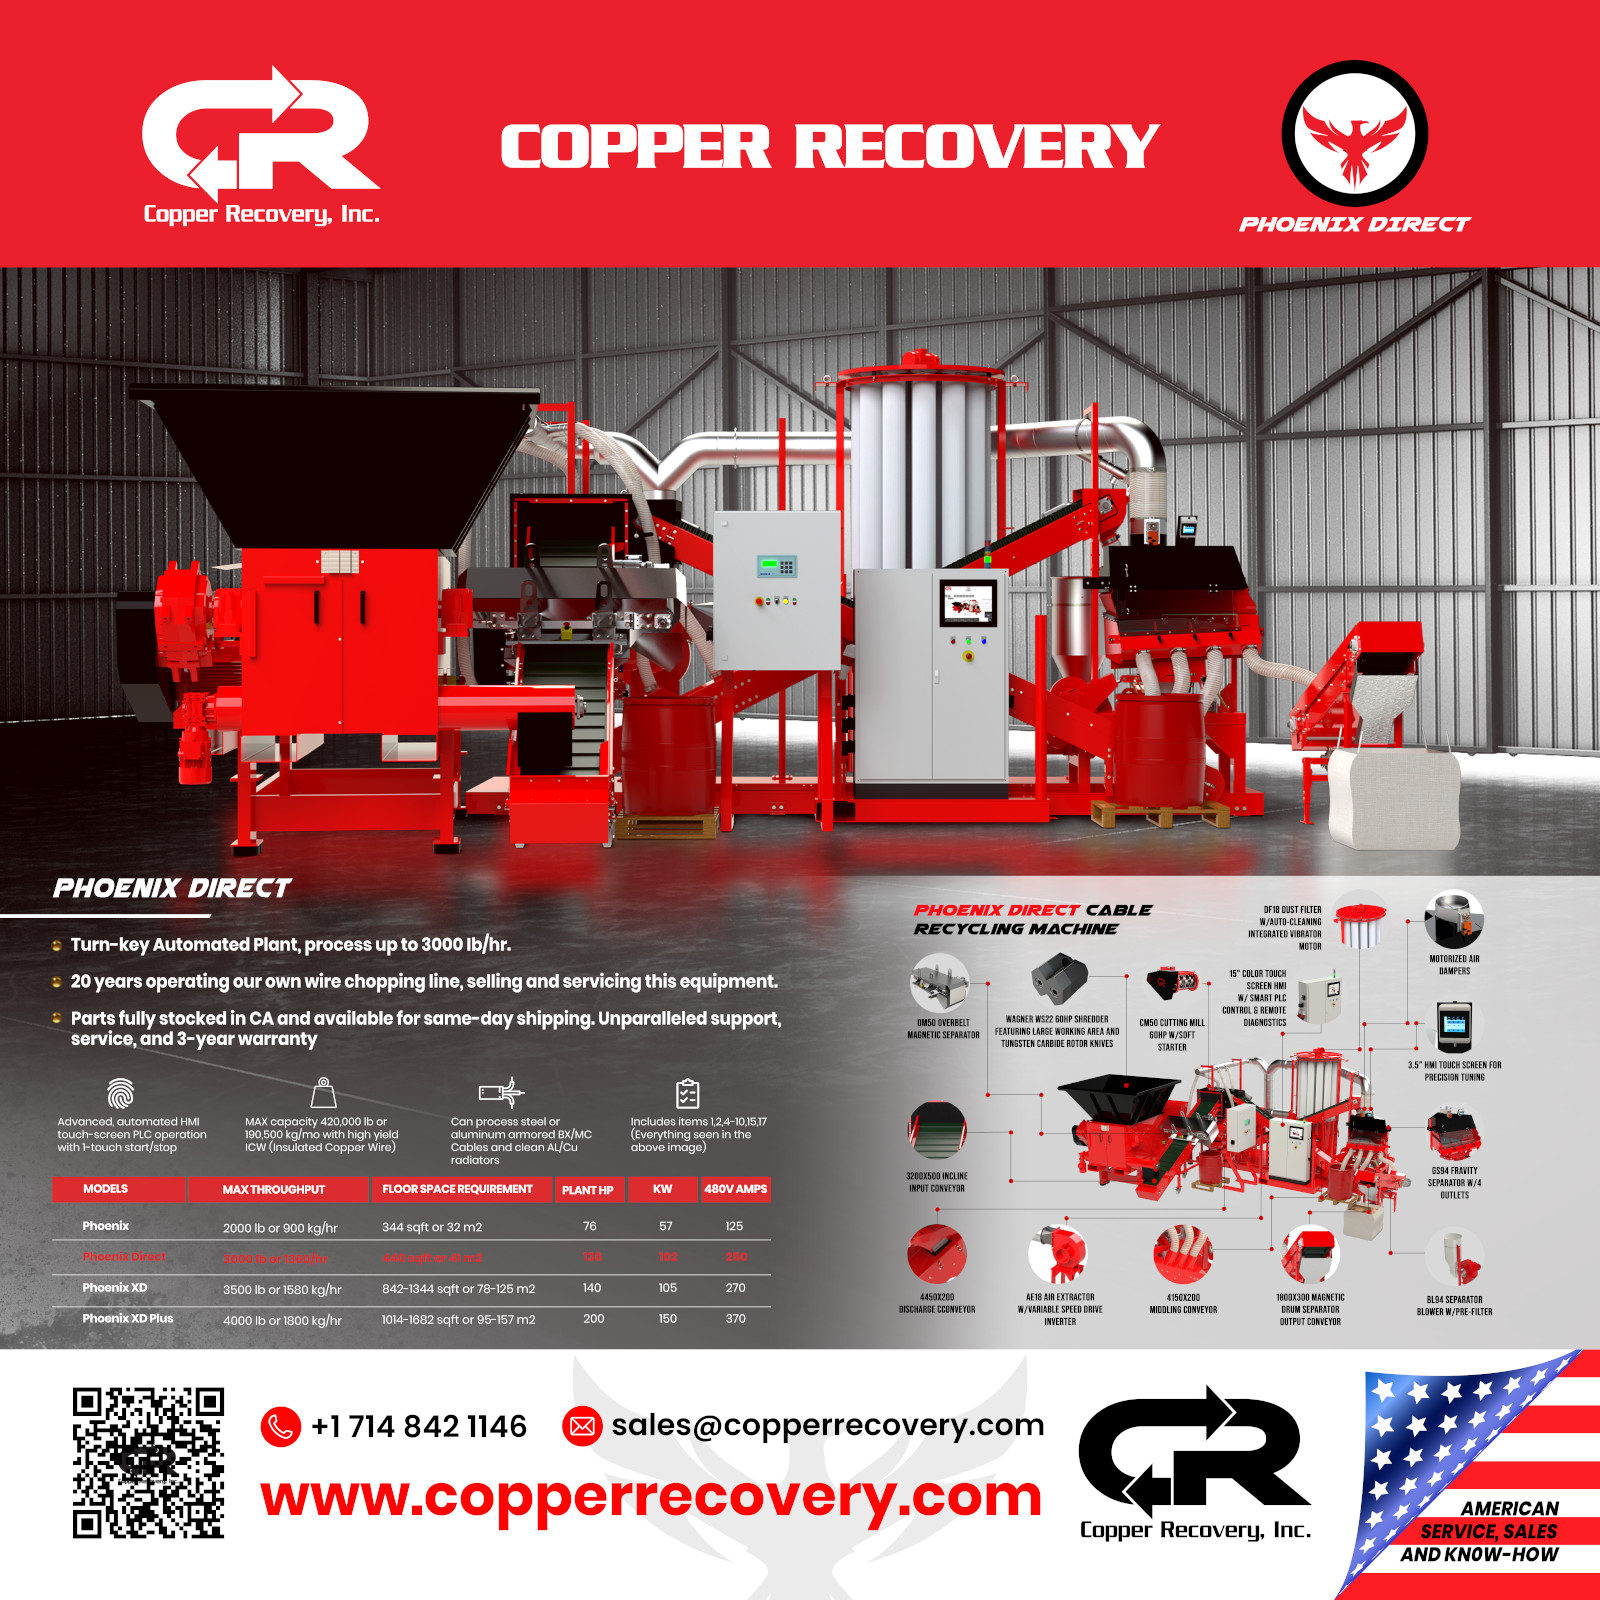 Copper Recovery Phoenix Direct